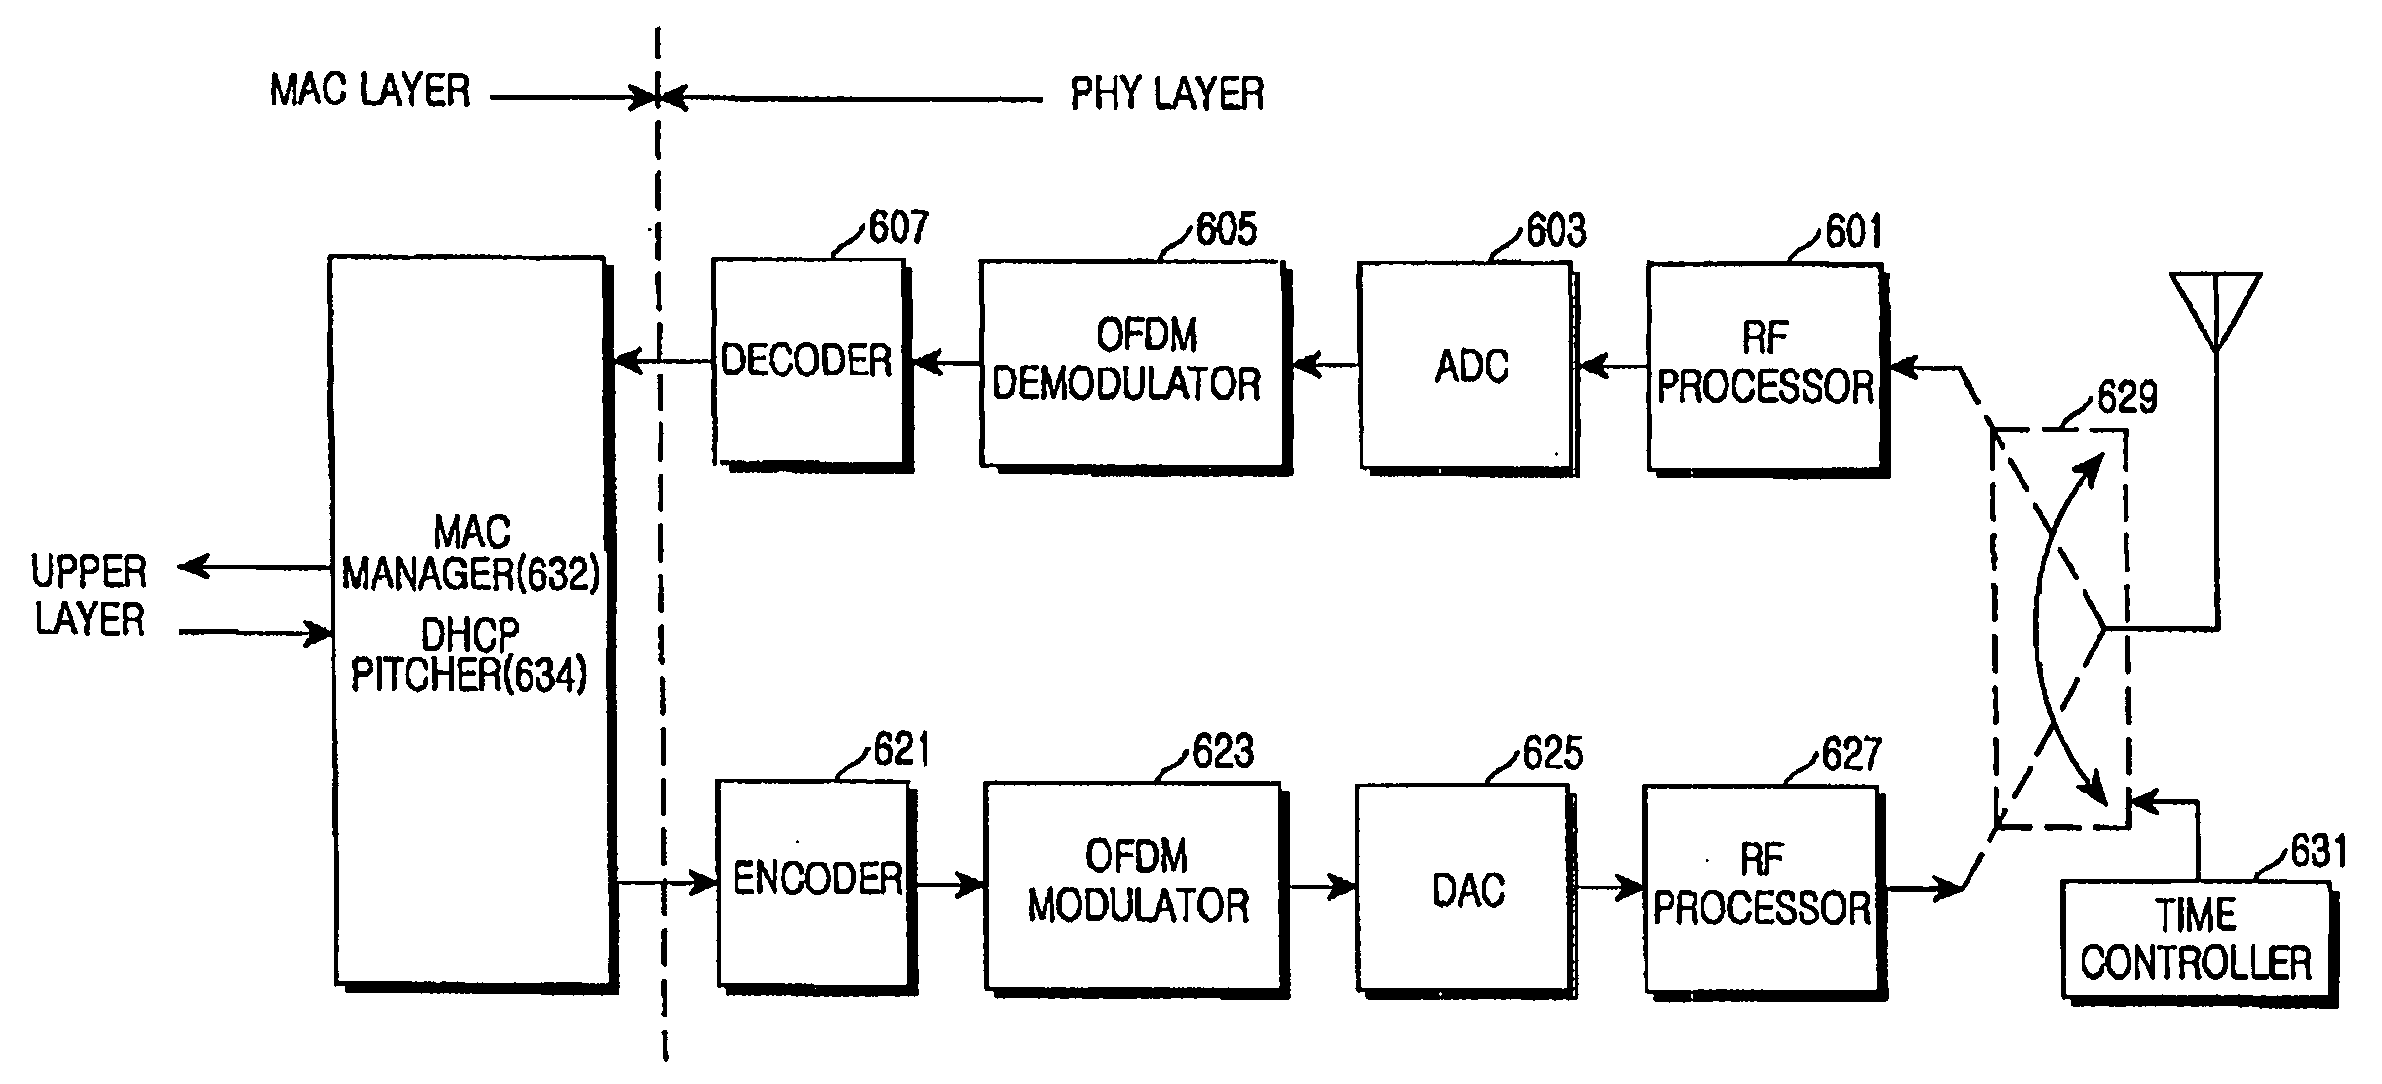 Apparatus and method for allocating network address